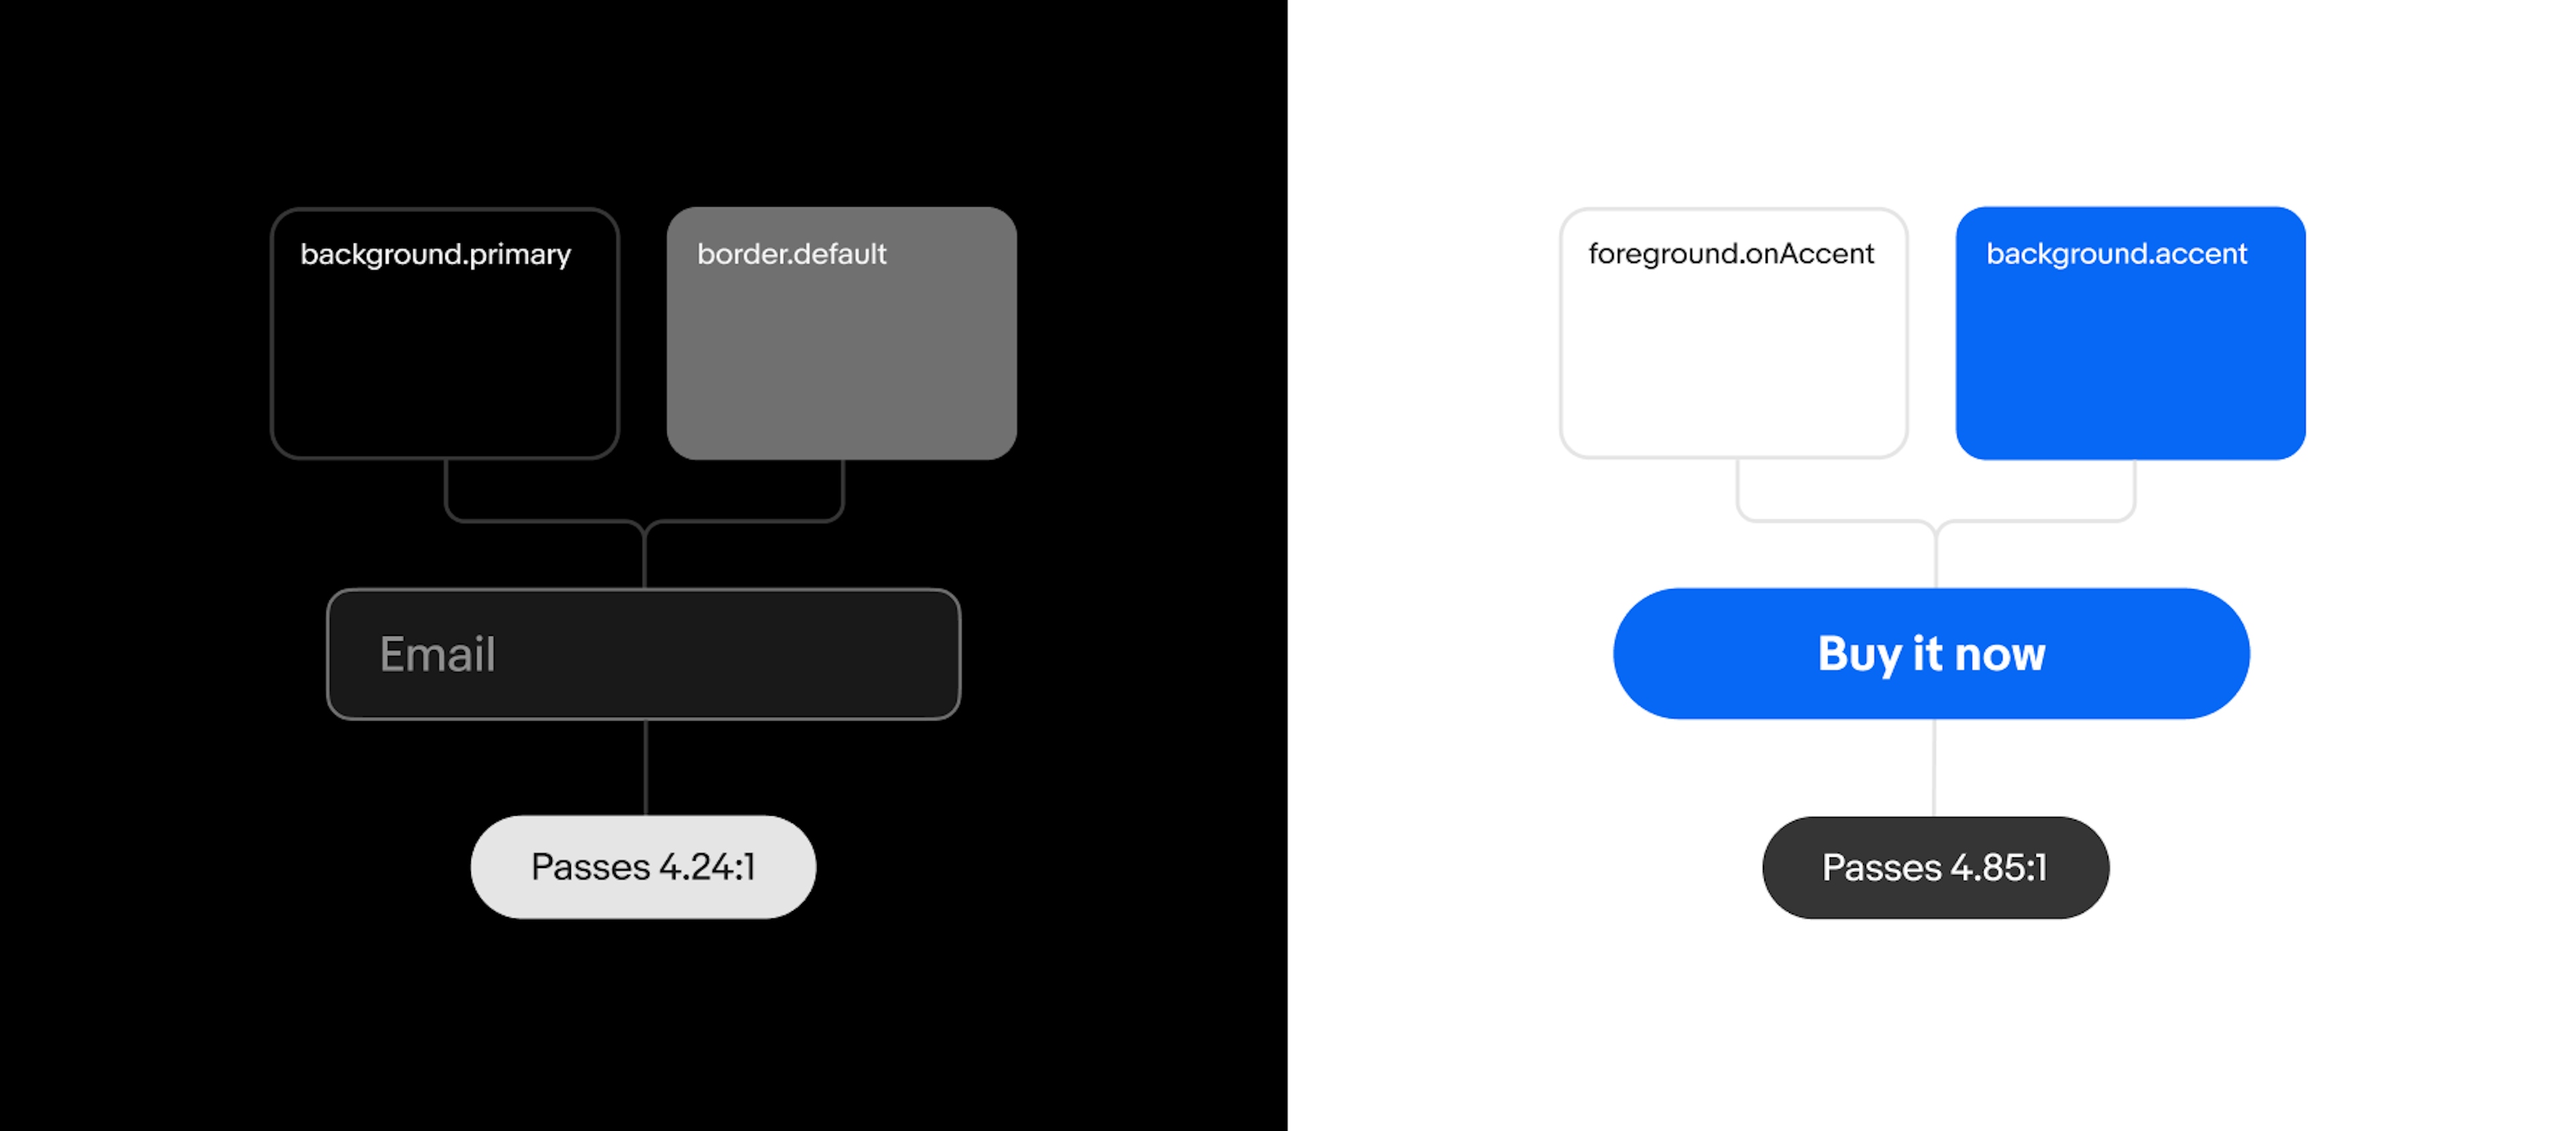 UI elements, highlighting contrast ratios and colors of input fields and buttons for accessibility. The left example is in dark mode, while the right is in light mode.